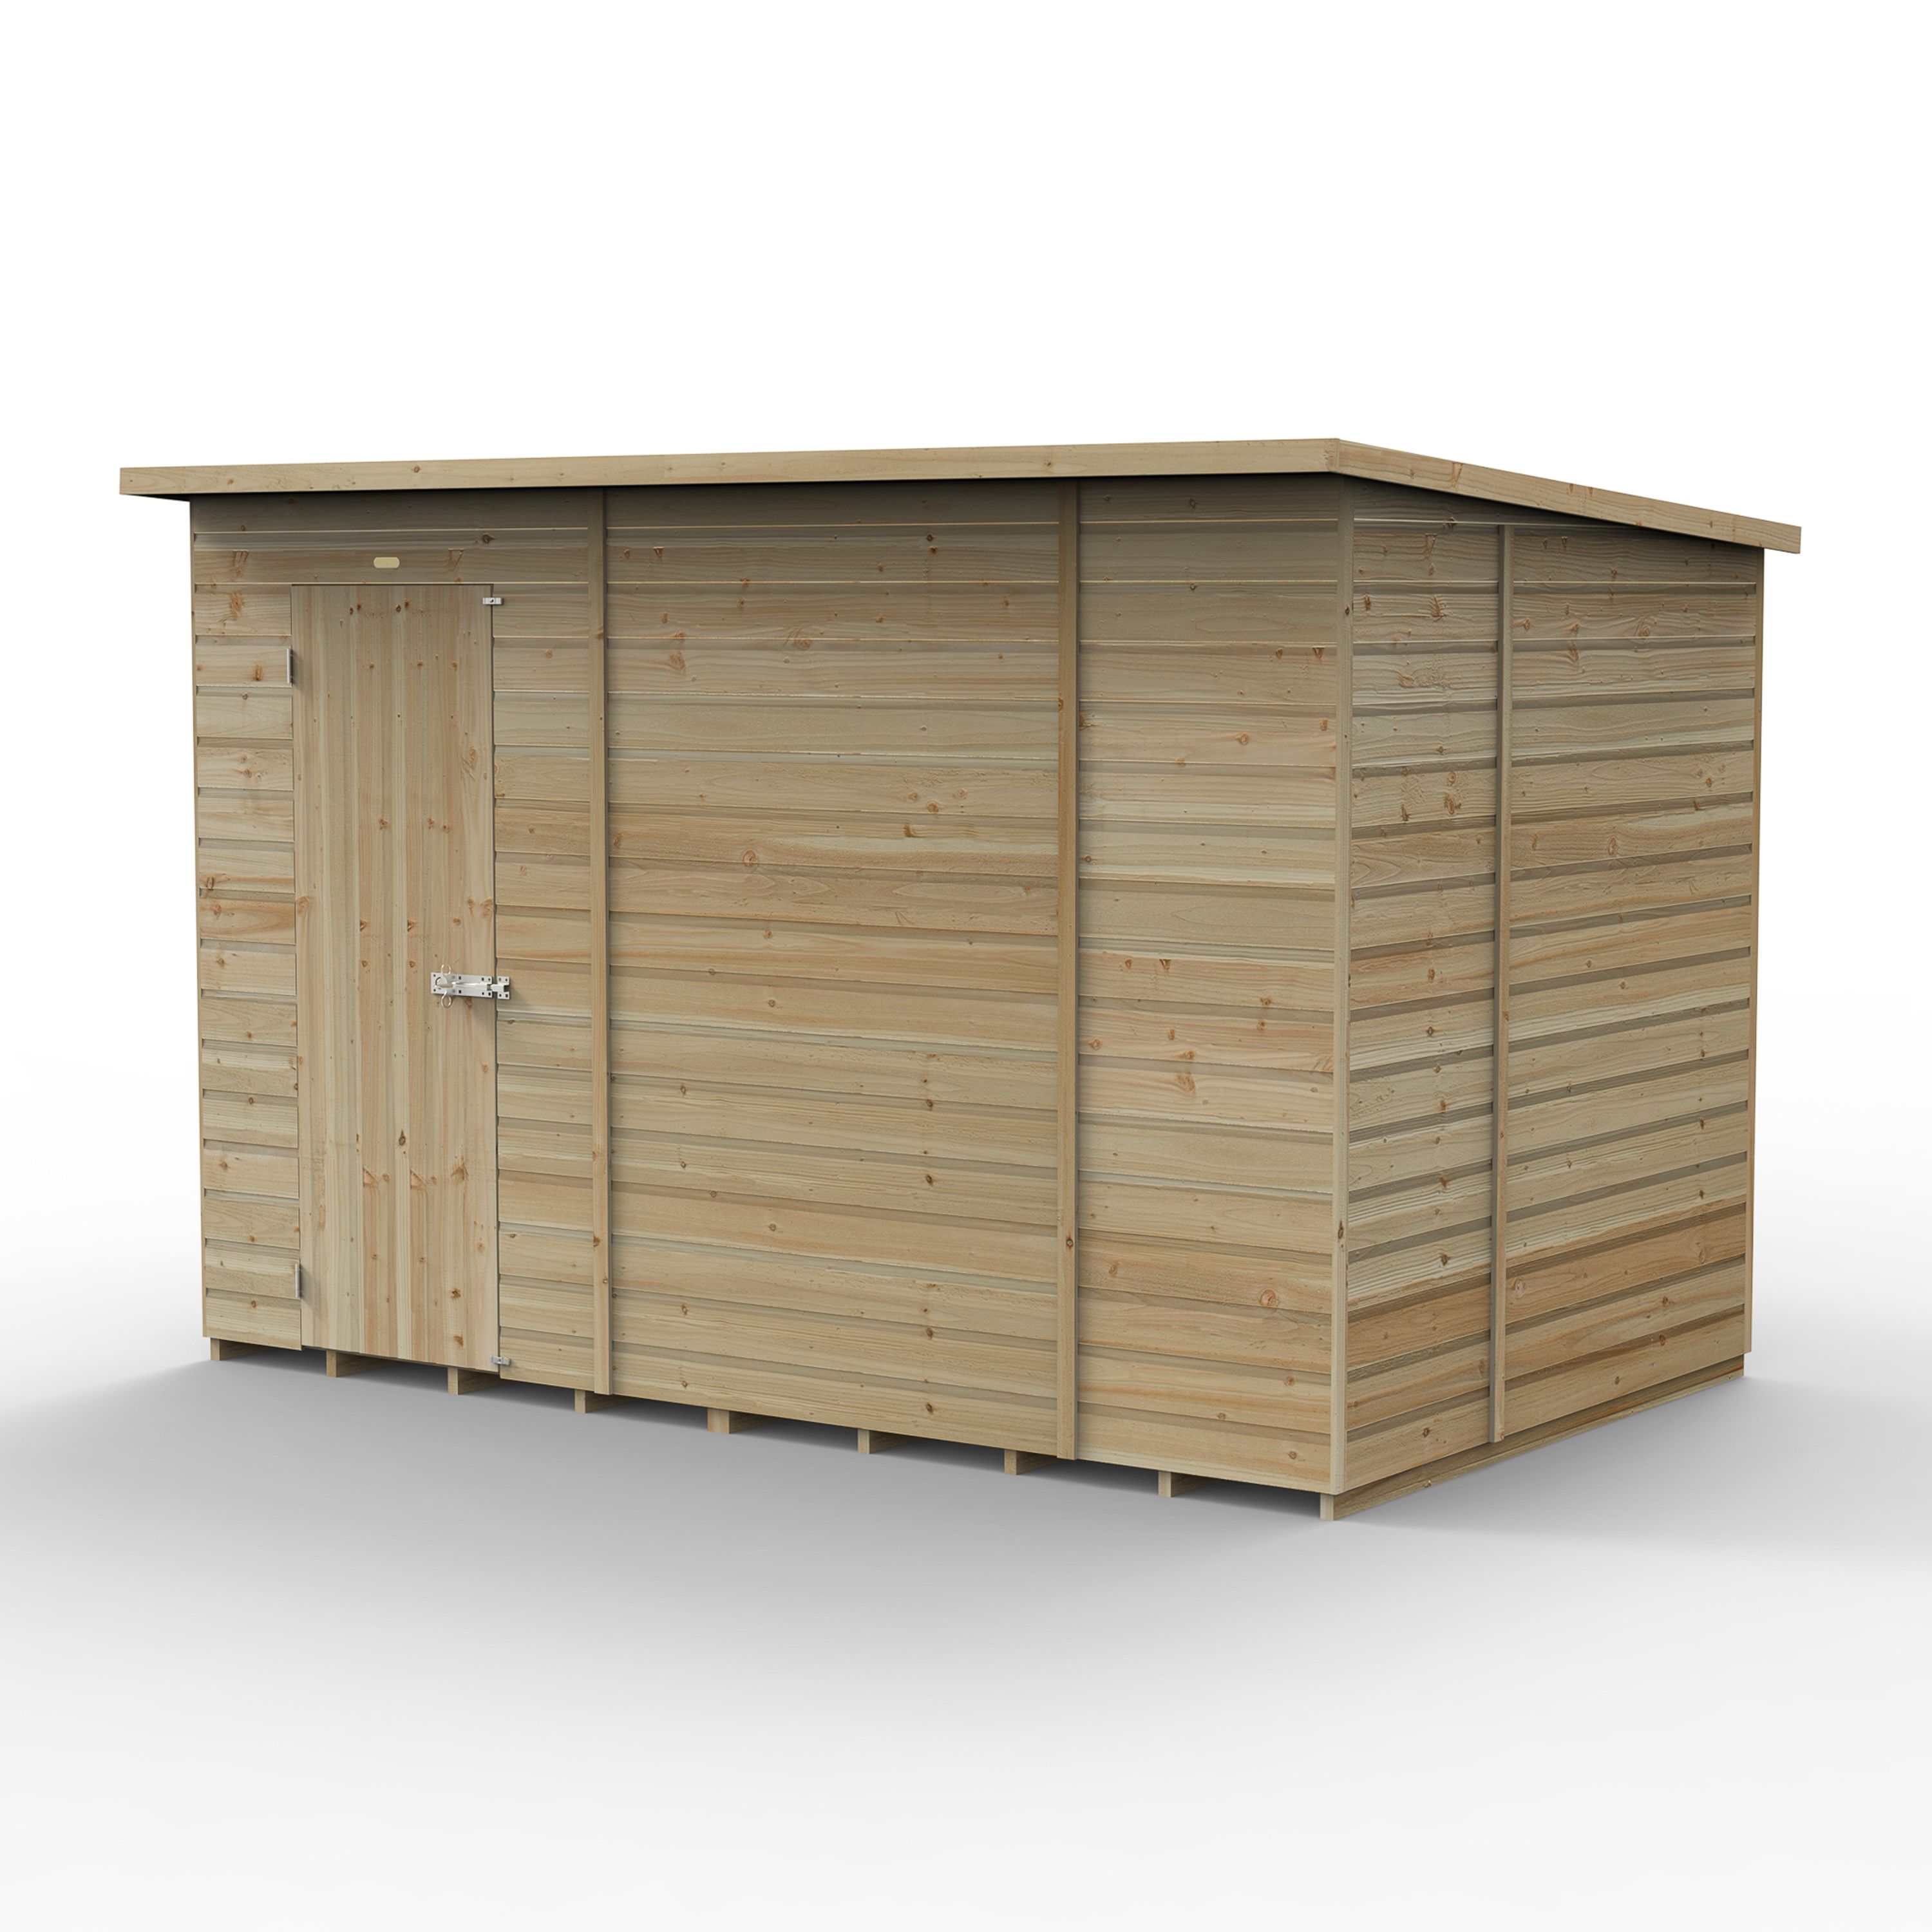 Forest Garden Beckwood 10x6 ft Pent Natural timber Wooden 2 door Shed with floor - Assembly not required